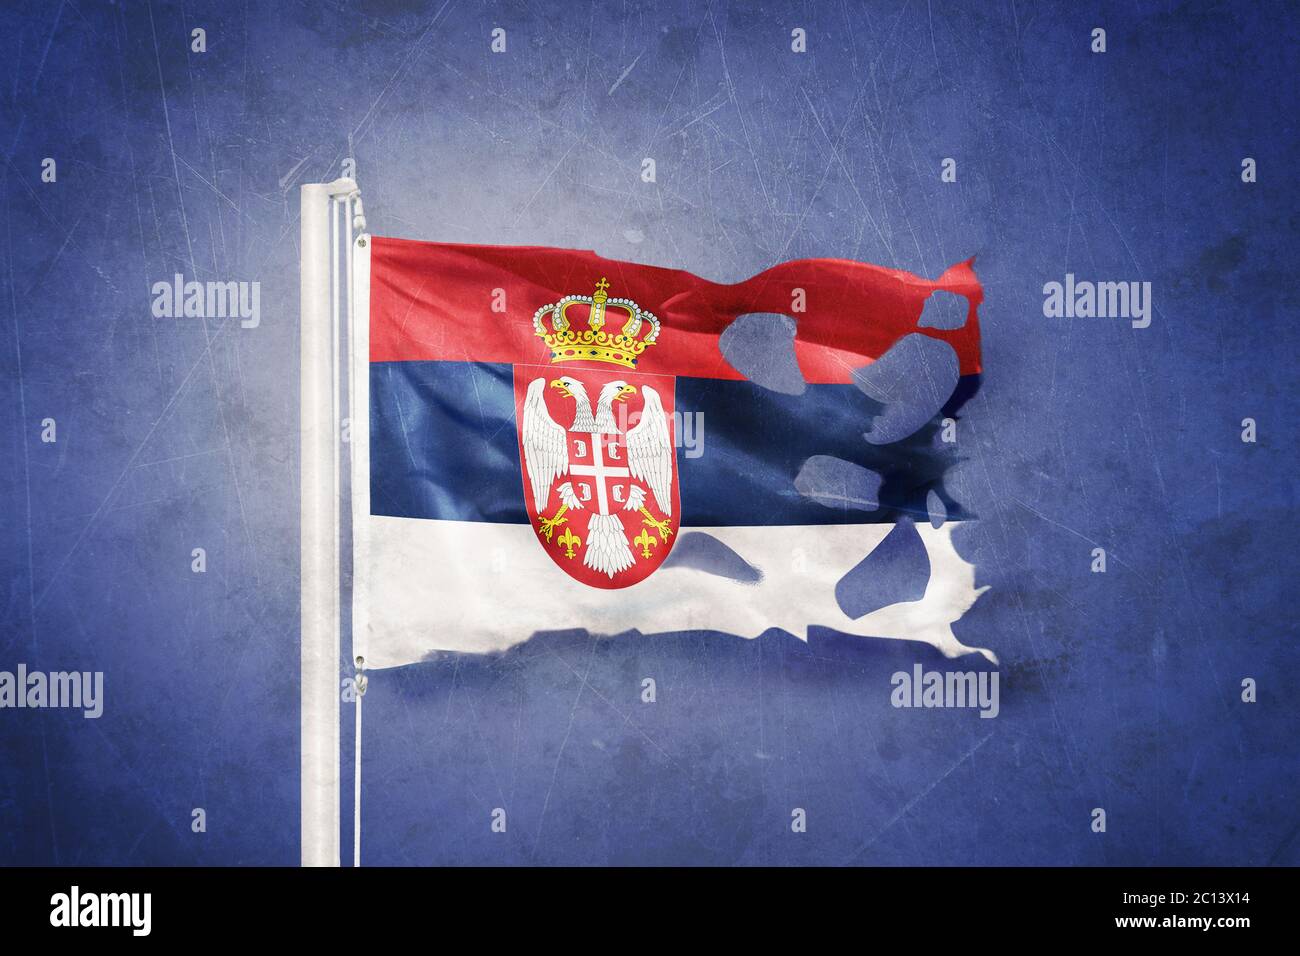 Torn flag of Serbia flying against grunge background Stock Photo